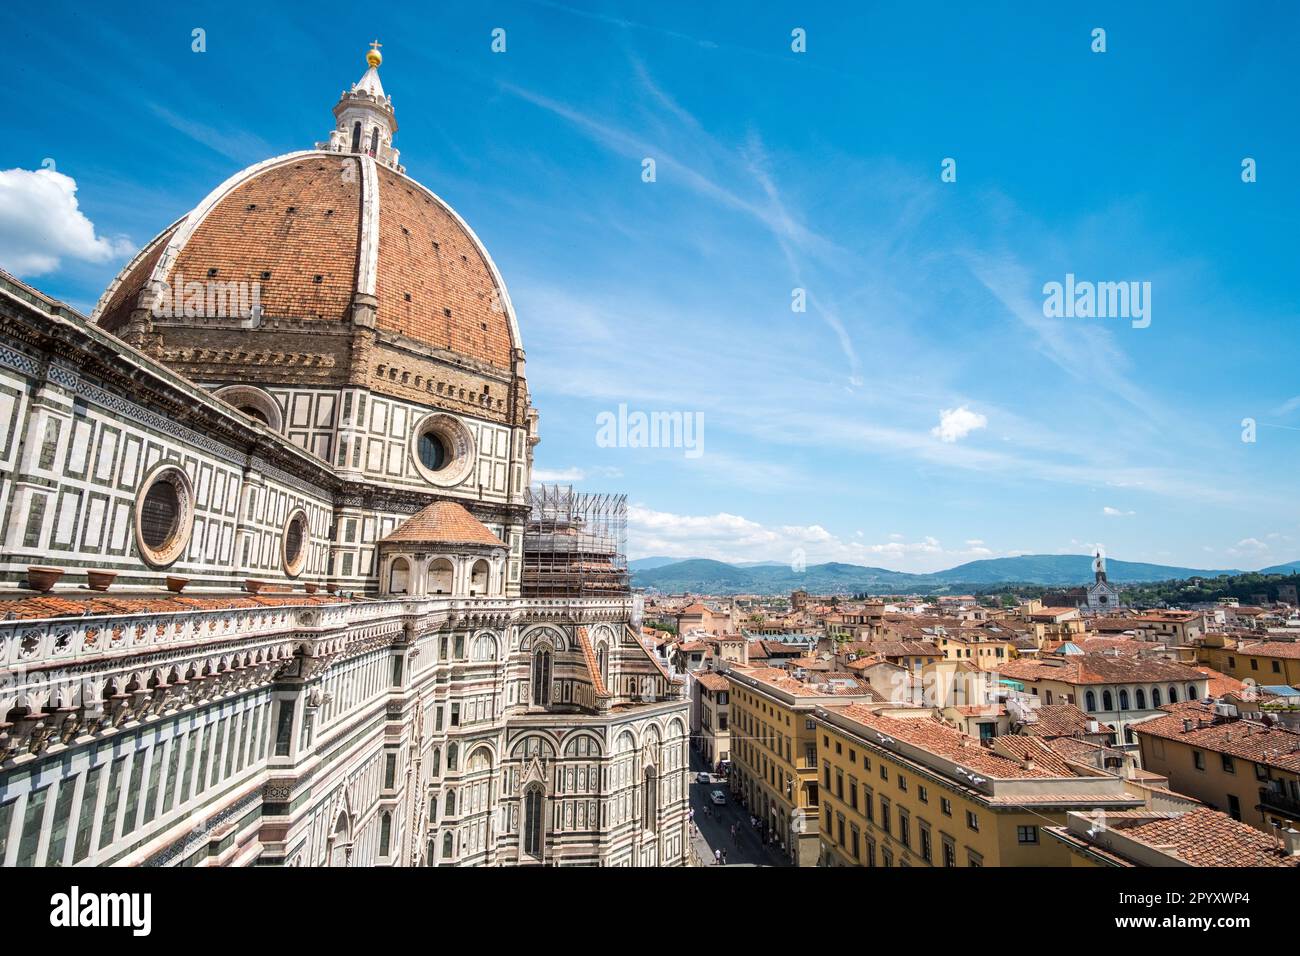 Aerial view of Florence. With Florence Duomo Cathedral. Basilica di Santa Maria del Fiore or Basilica of Saint Mary of the Flower Stock Photo